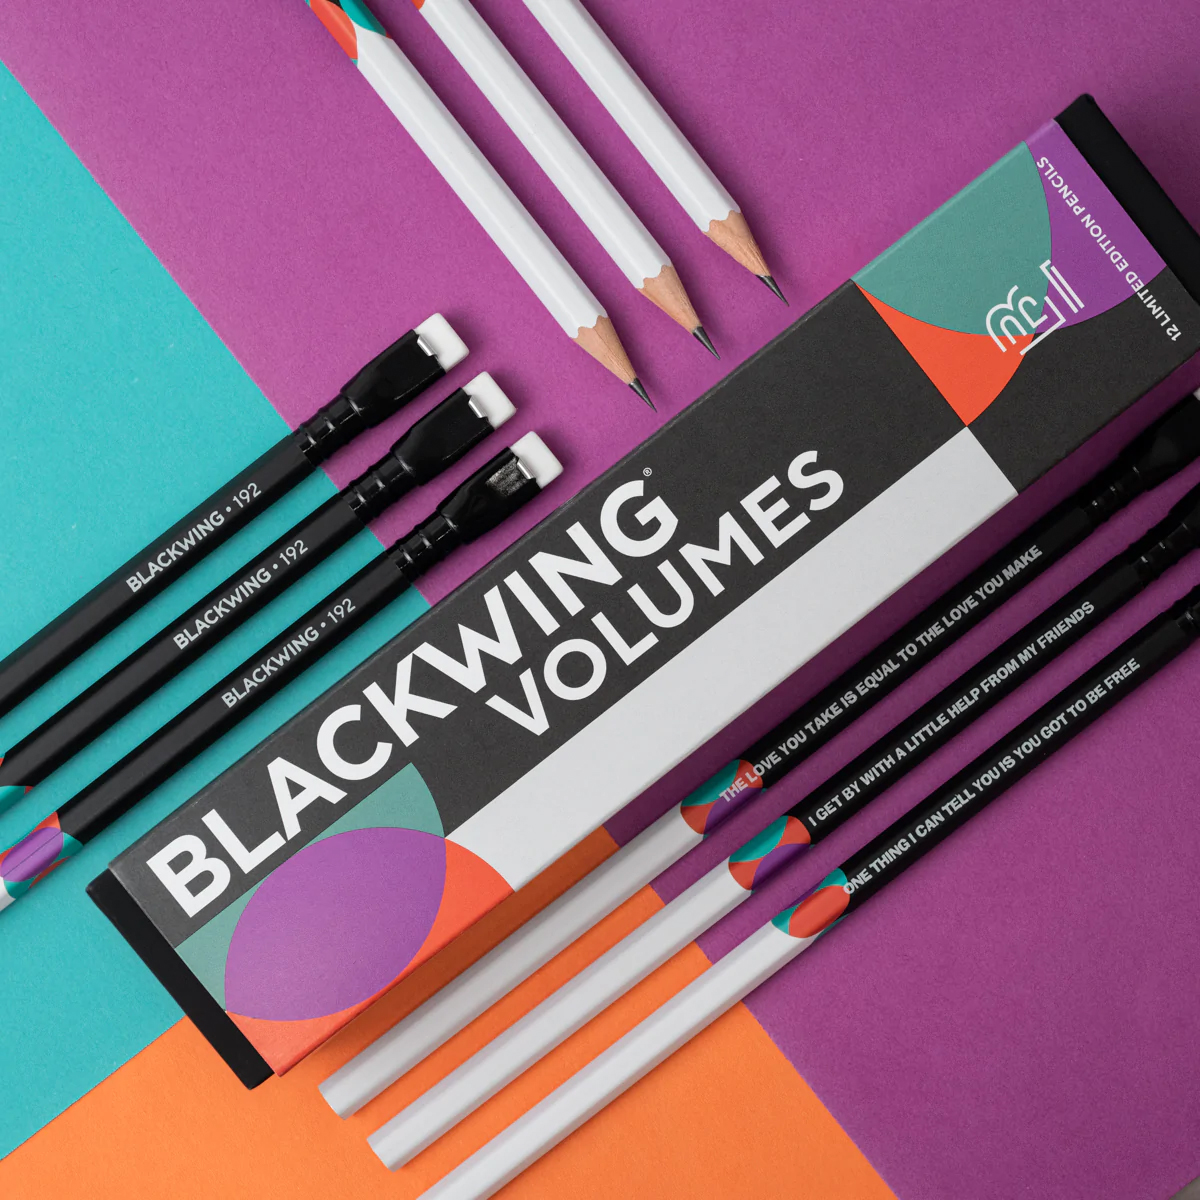 Vol 192 Limited Edition 12-pack in the group Pens / Writing / Pencils at Pen Store (129314)